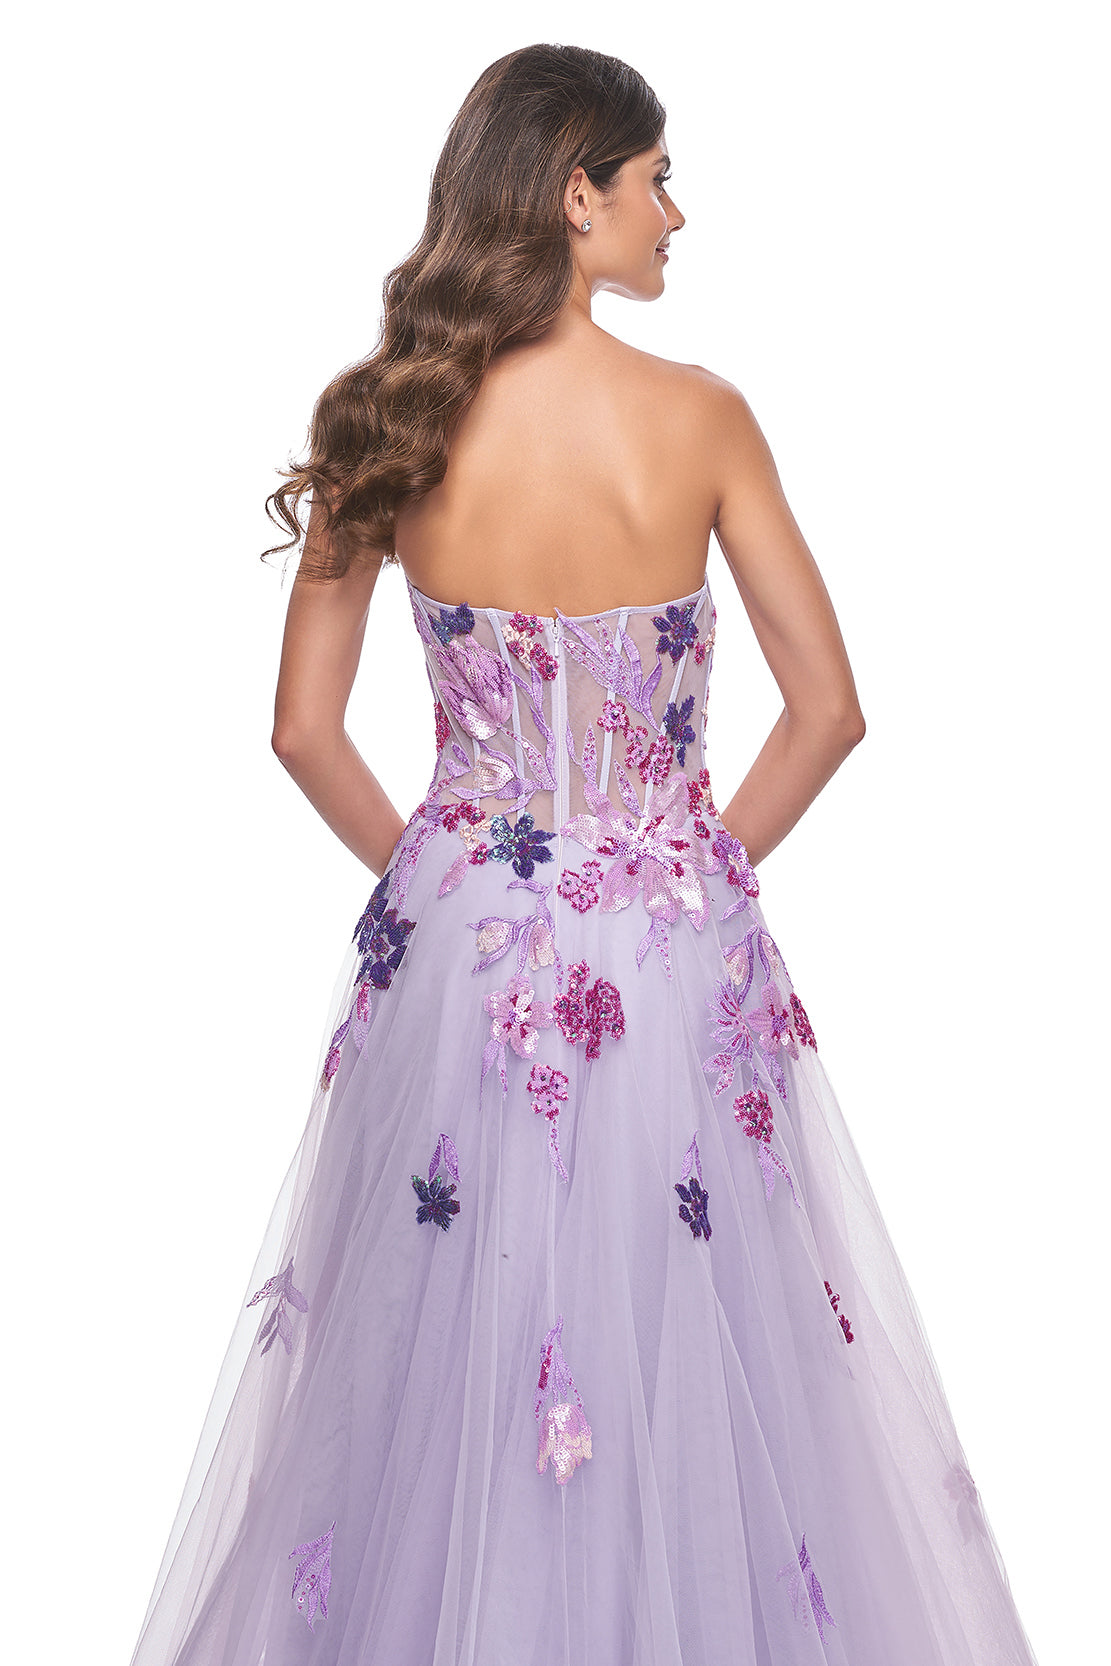 La Femme 32156 Strapless A-Line Tulle Prom and Quinceañera Dress - A captivating A-line tulle dress featuring a strapless design and floral multicolor sequin lace applique details, perfect for making a statement at prom or quinceañera celebrations.  The model is wearing the dress in the color Lavender.  This is view of the back of the dress.